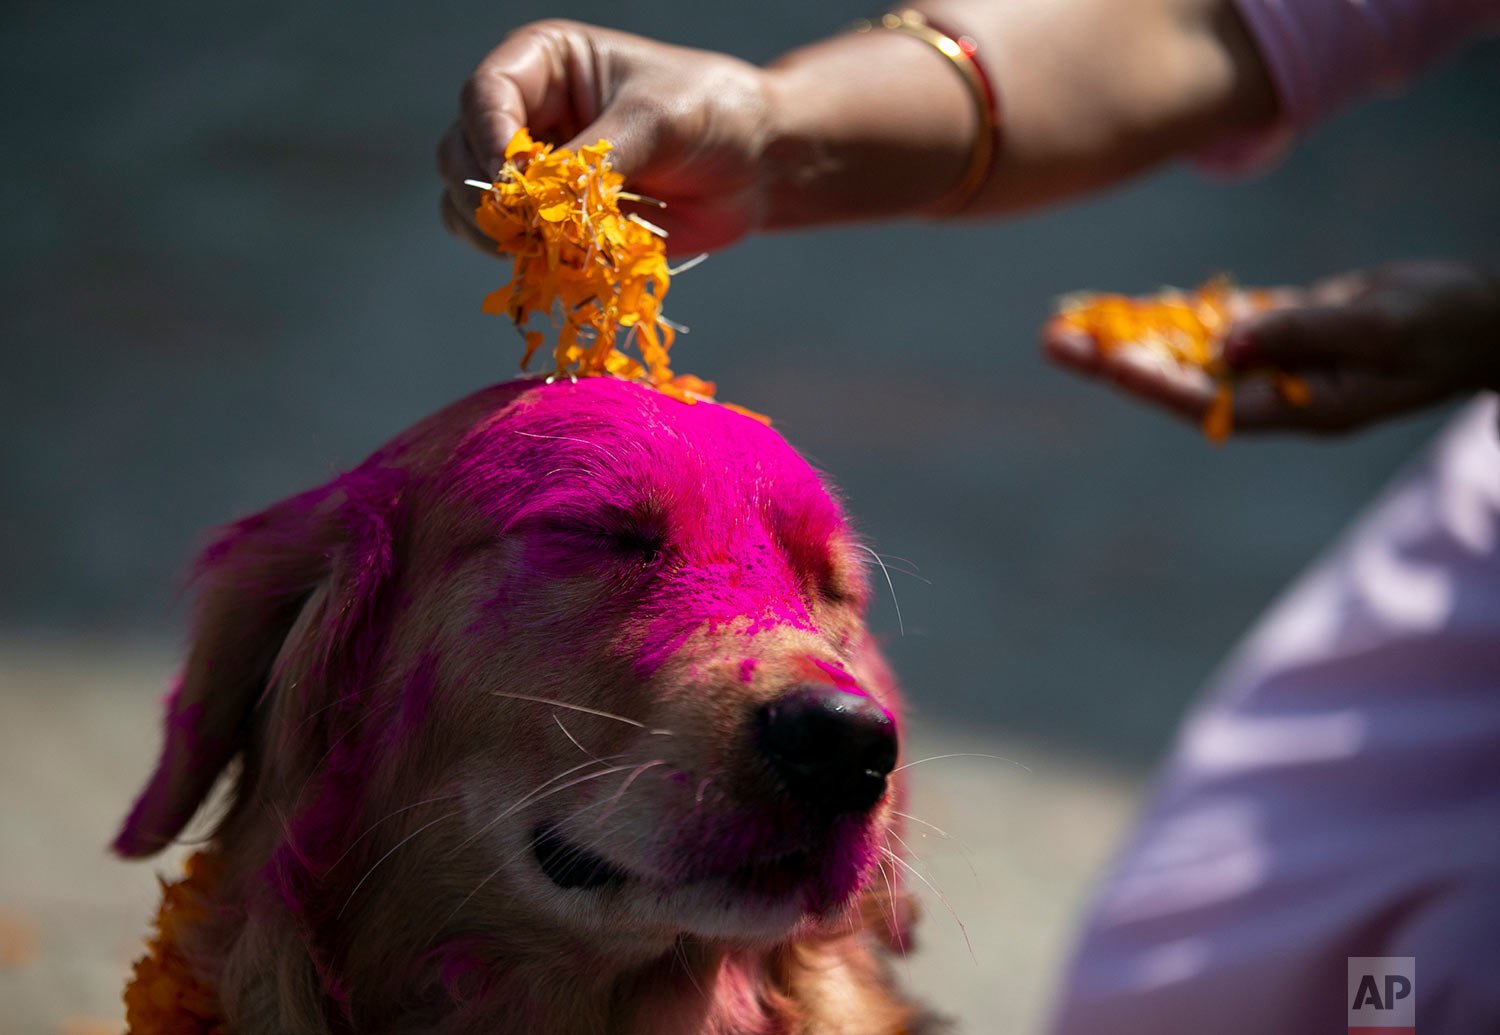  A Nepalese woman puts marigold petals on a police dog during Tihar festival celebrations at a kennel division in Kathmandu, Nepal, Wednesday, Nov. 3, 2021.  (AP Photo/Niranjan Shrestha) 